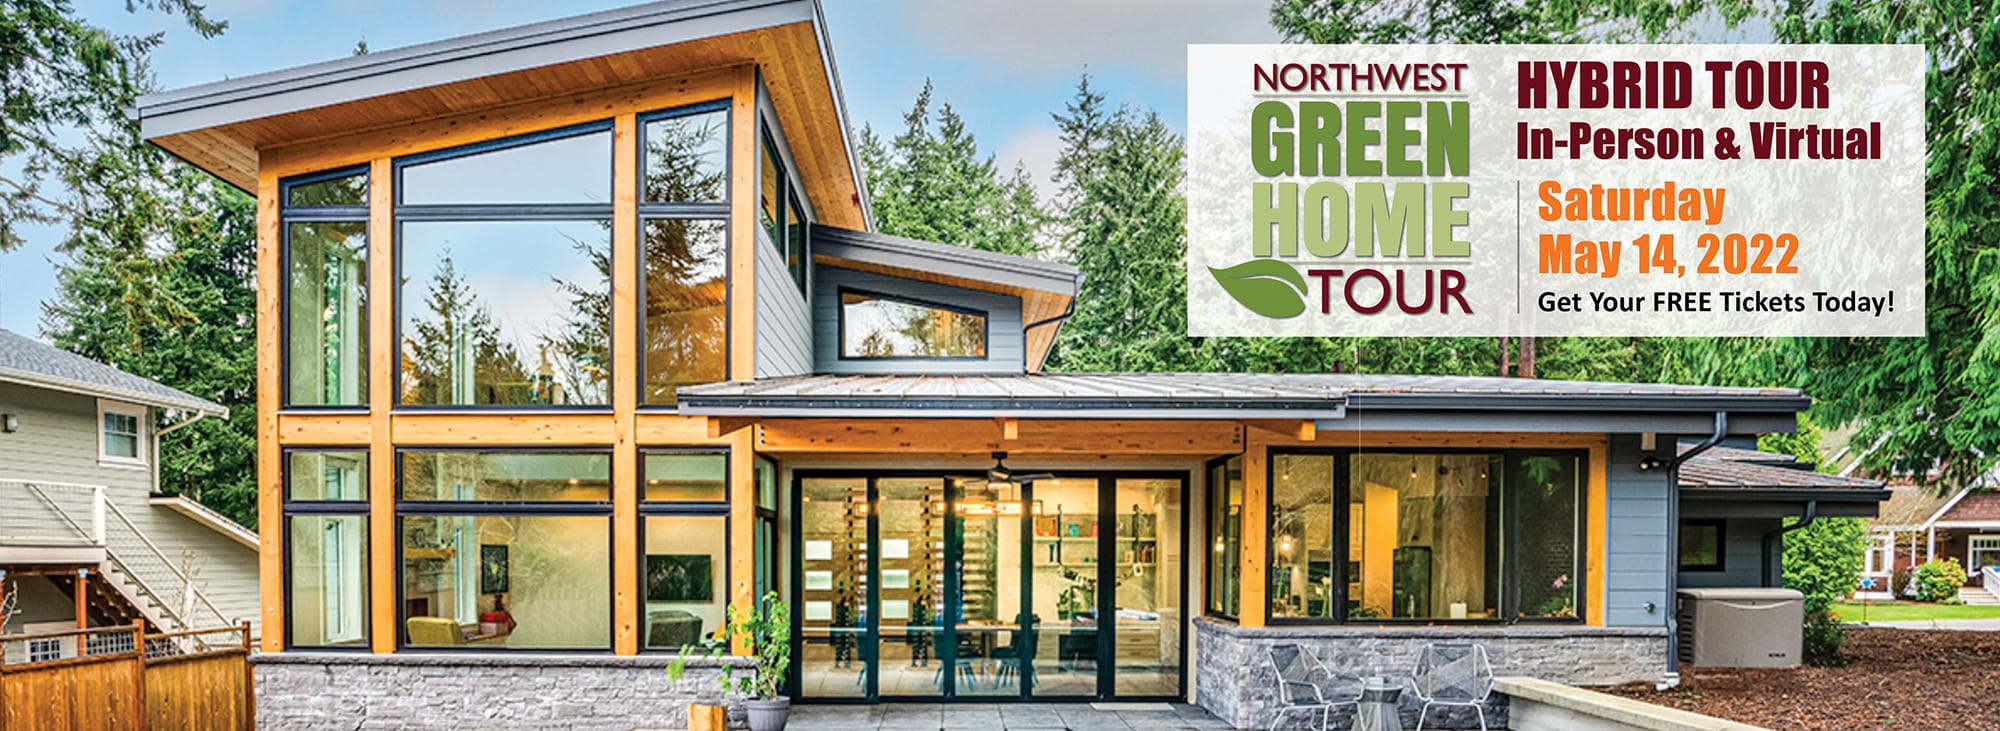 NW Green Home Tour